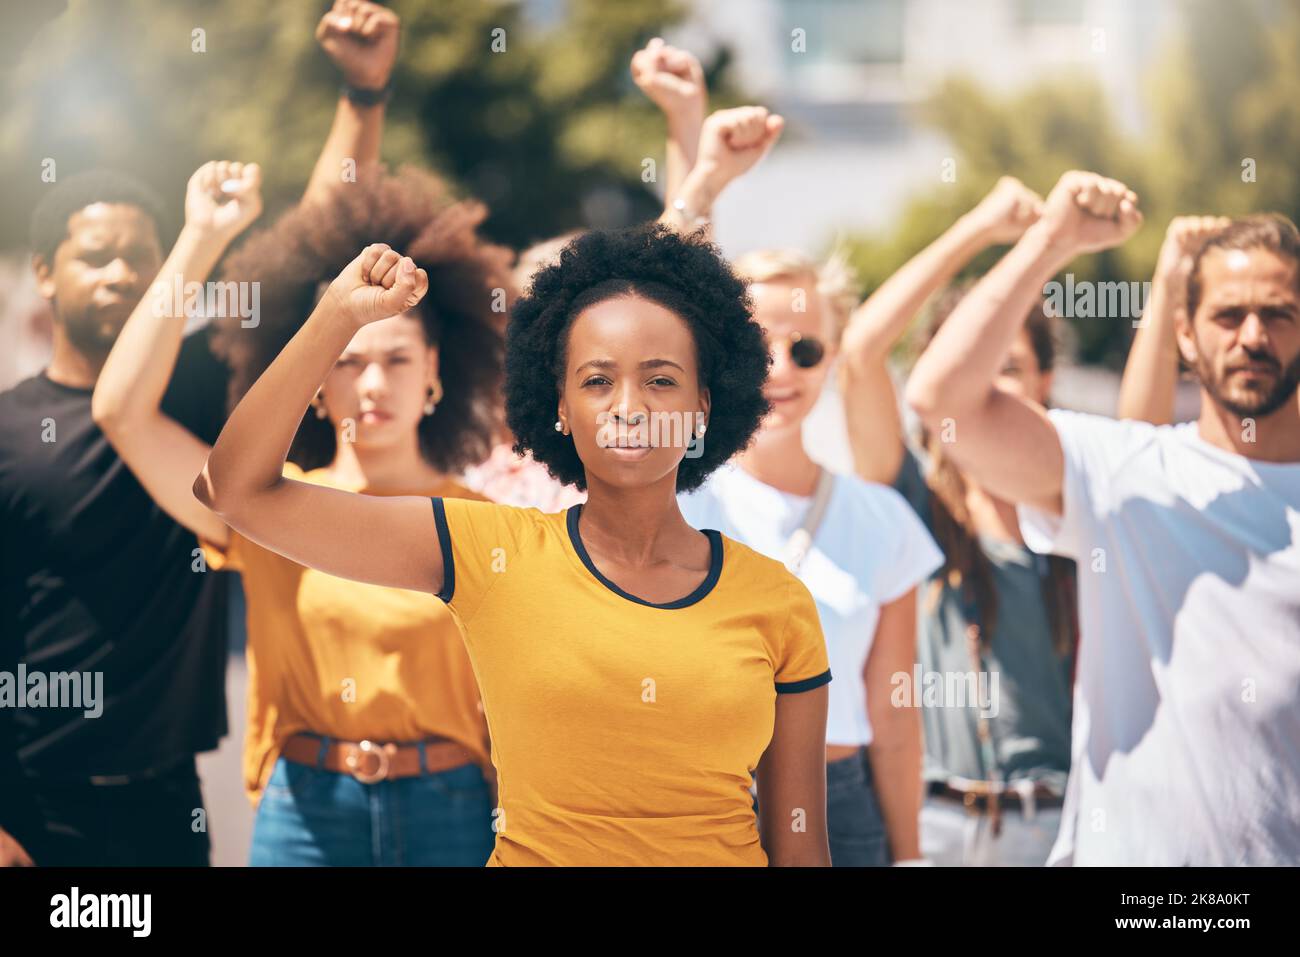 Protest, group of people with hands in air in street and solidarity for womans rights, human rights and against war. Diversity, men and women in crowd Stock Photo